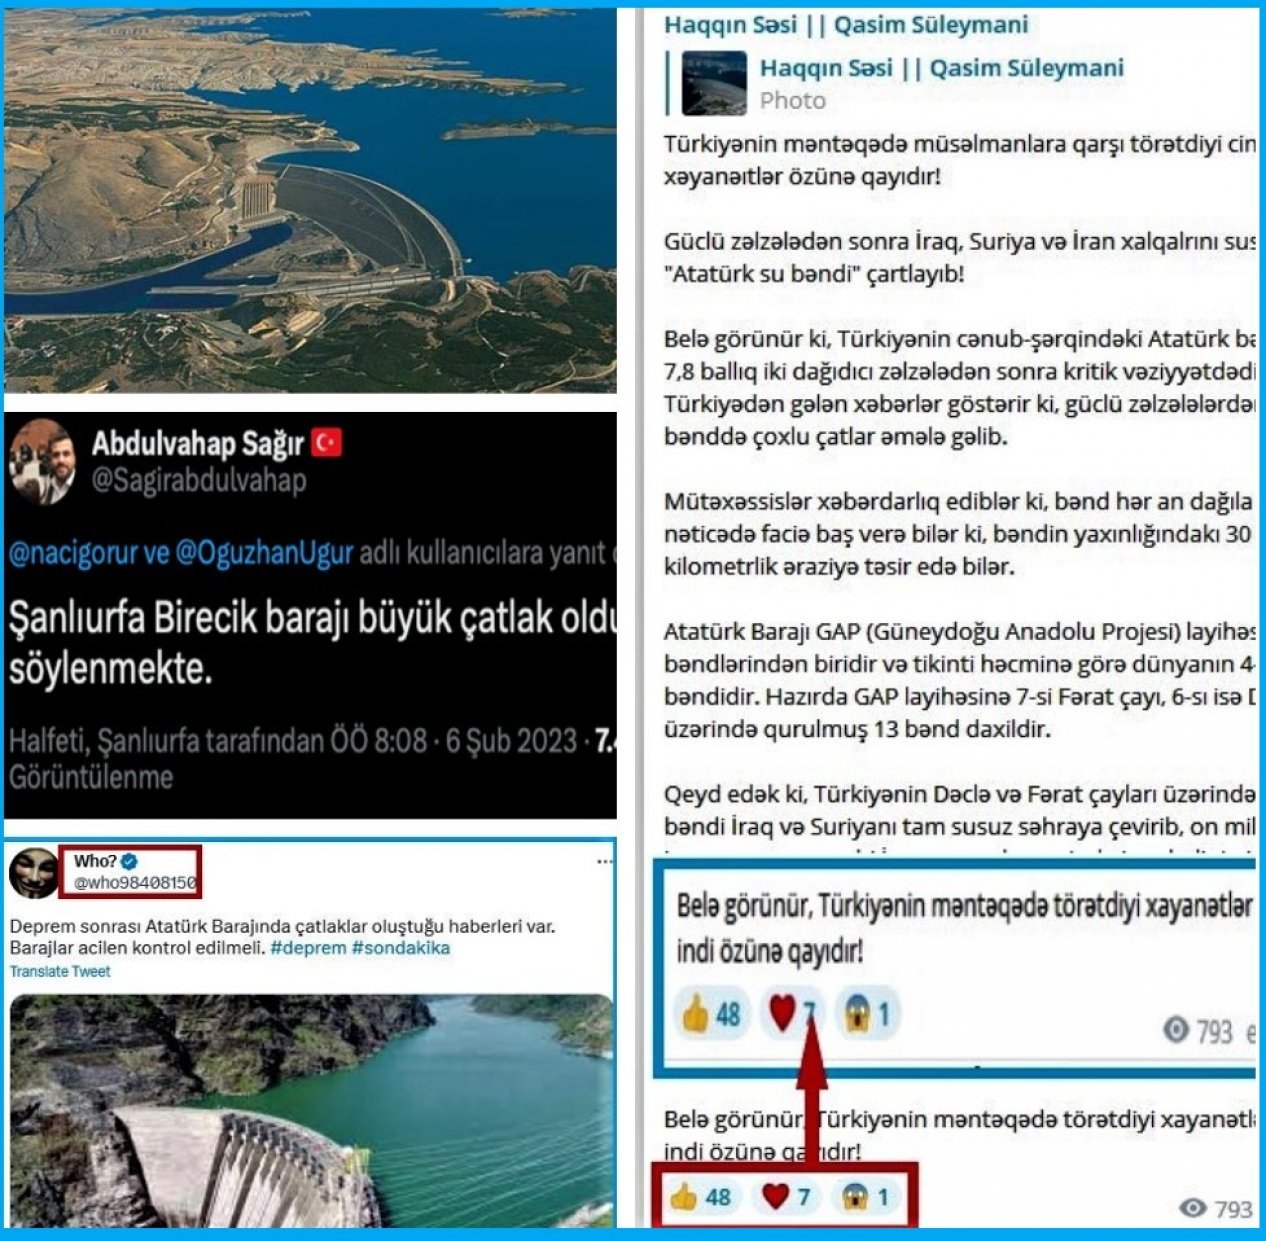 Allegations about overflow of water dams in quake area in Turkiye unfounded